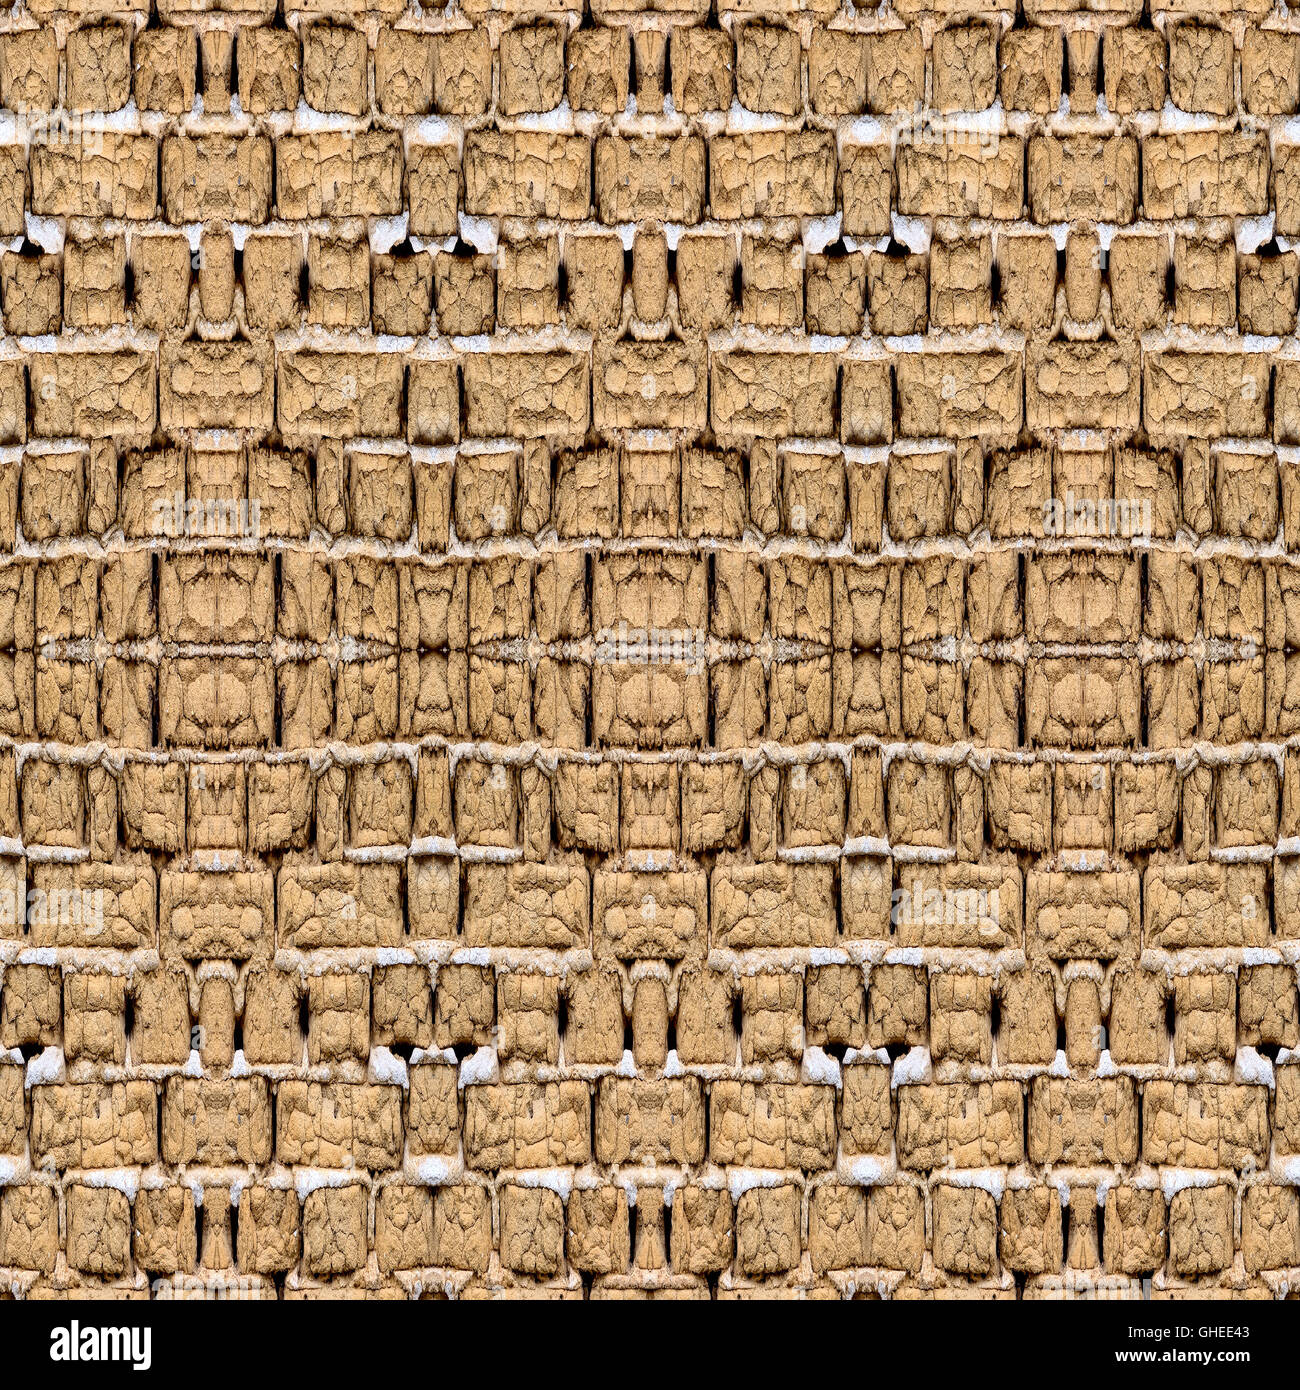 Seamless abstract architecture design for background, wallpaper, print or any use based on rustic wall of raw adobe bricks. Anti Stock Photo